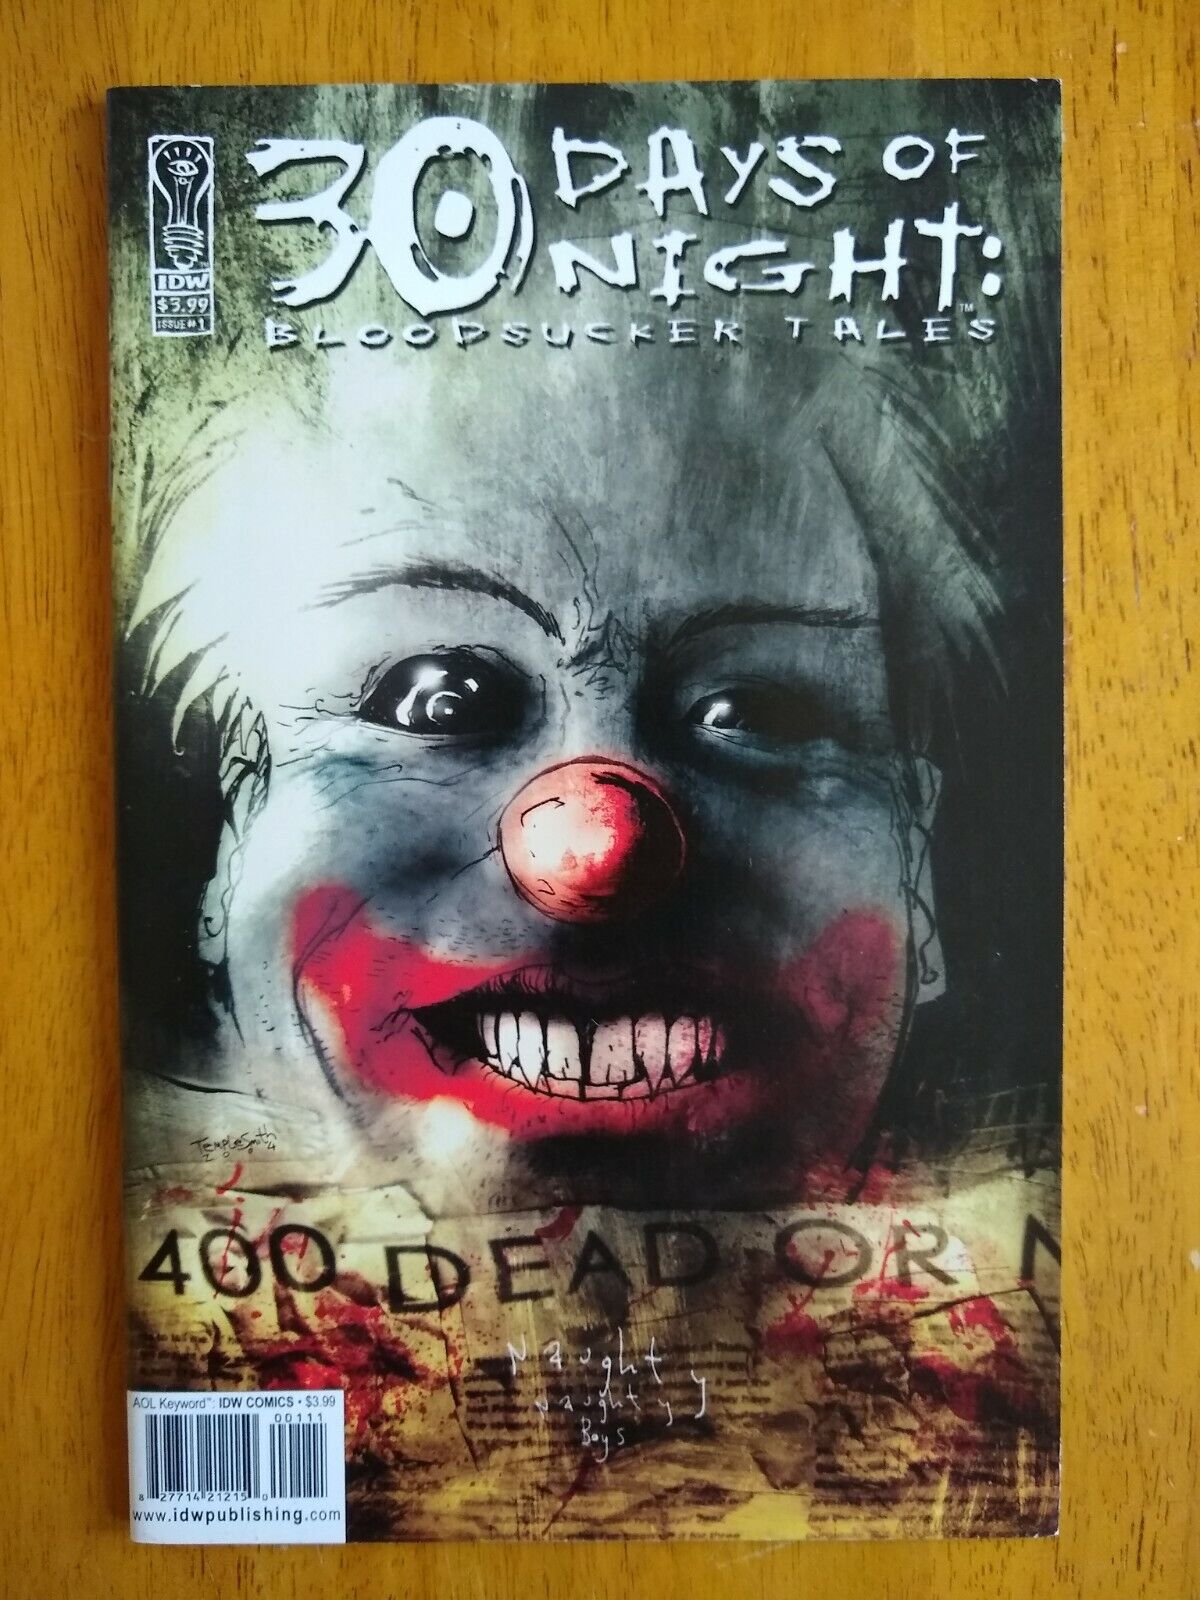 30 Days Of Night #1 Bloodsucker Tales 2004 IDW Comic Book Niles Fraction.